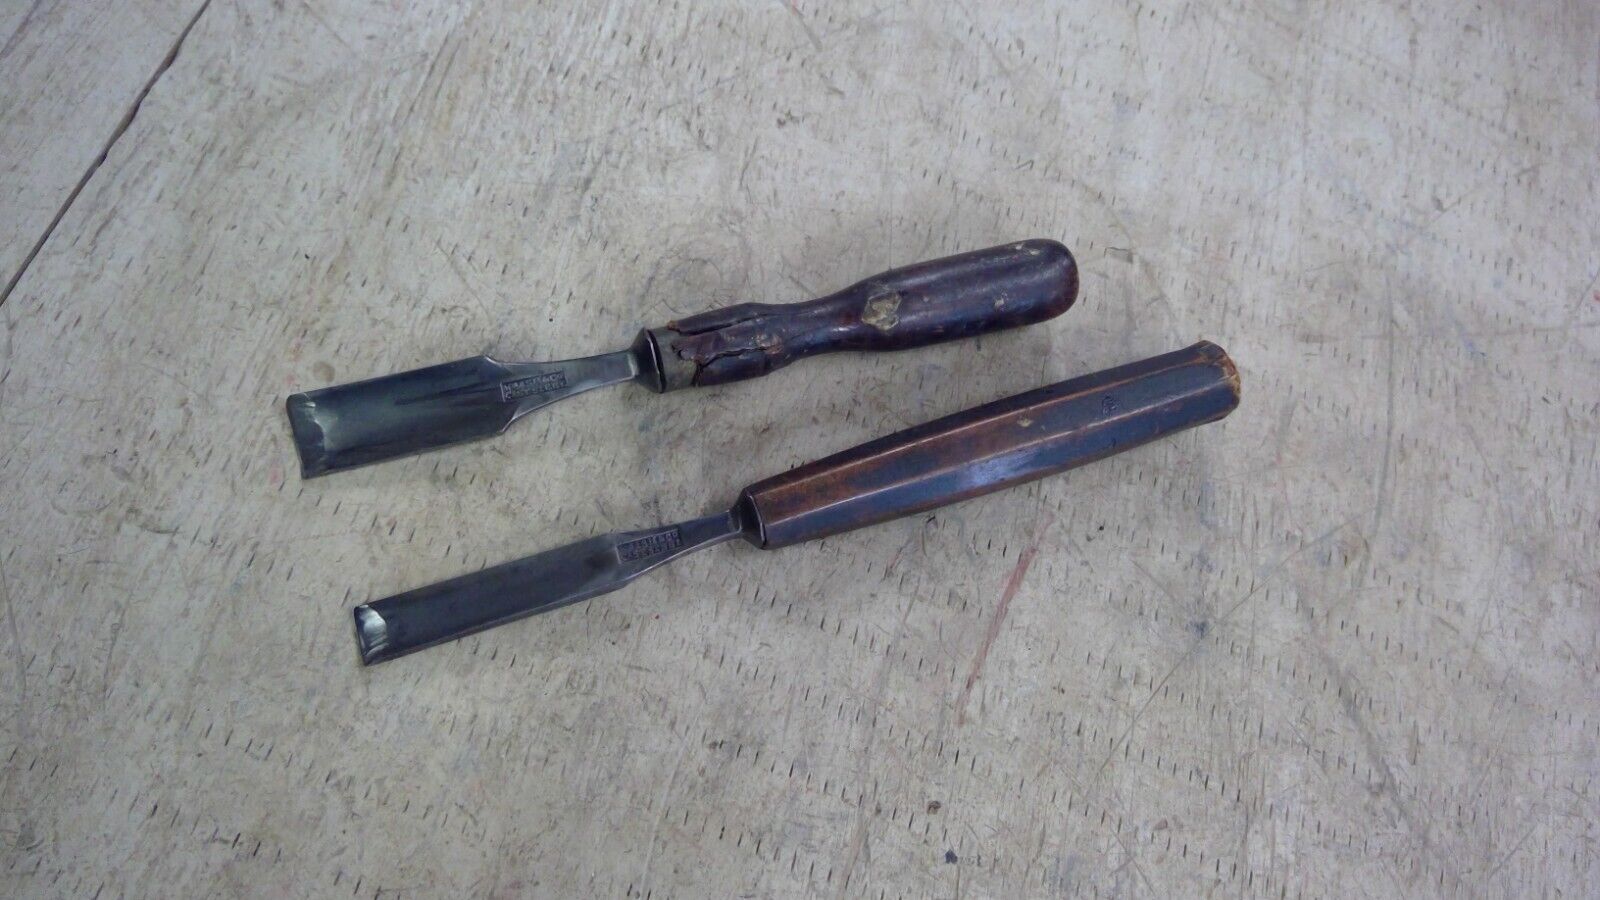 2 Vintage Wm. Ash & Co Woodworking Gouge Carpentry Hand Tools 3/4\